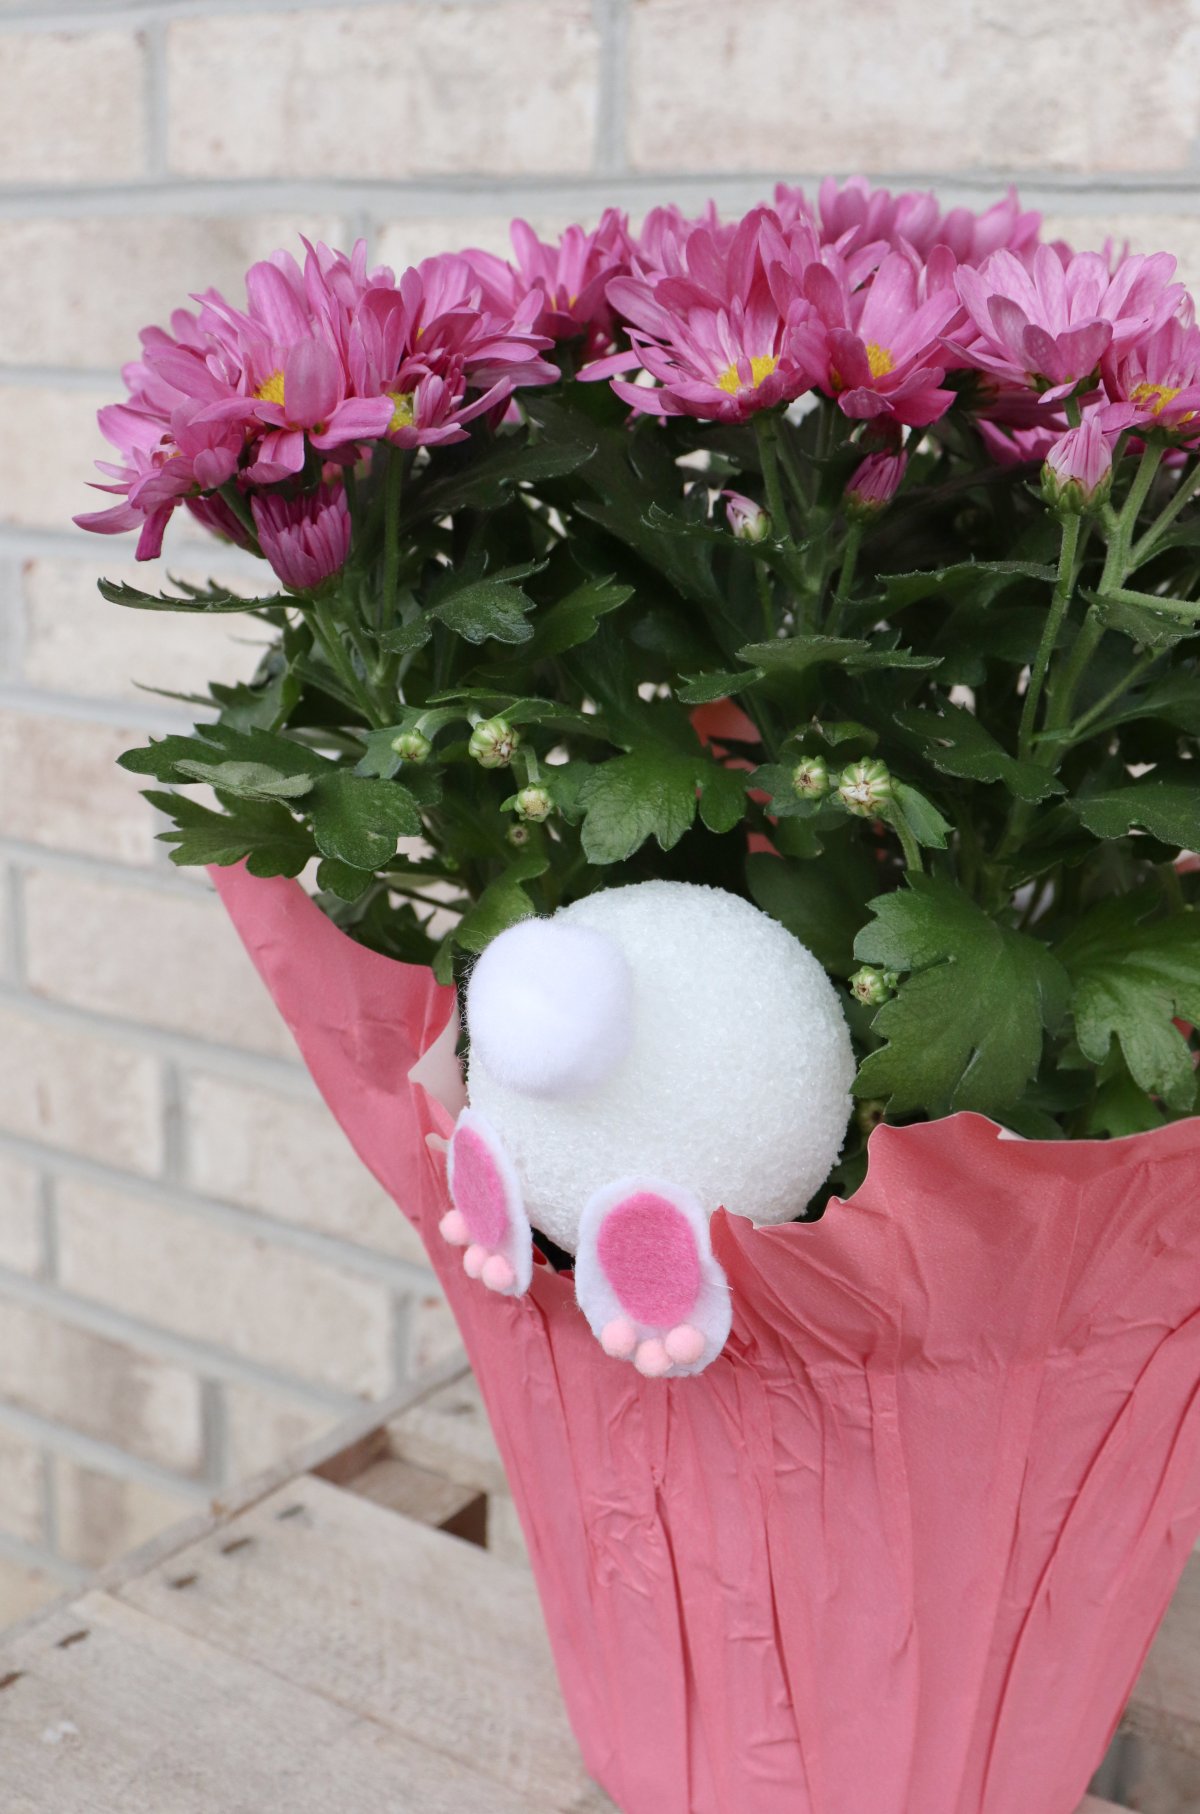 Image contains a potted purple mum plant with a "bunny bottom" made of a styrofoam ball, pom pom, and felt feet sticking out of the pot.